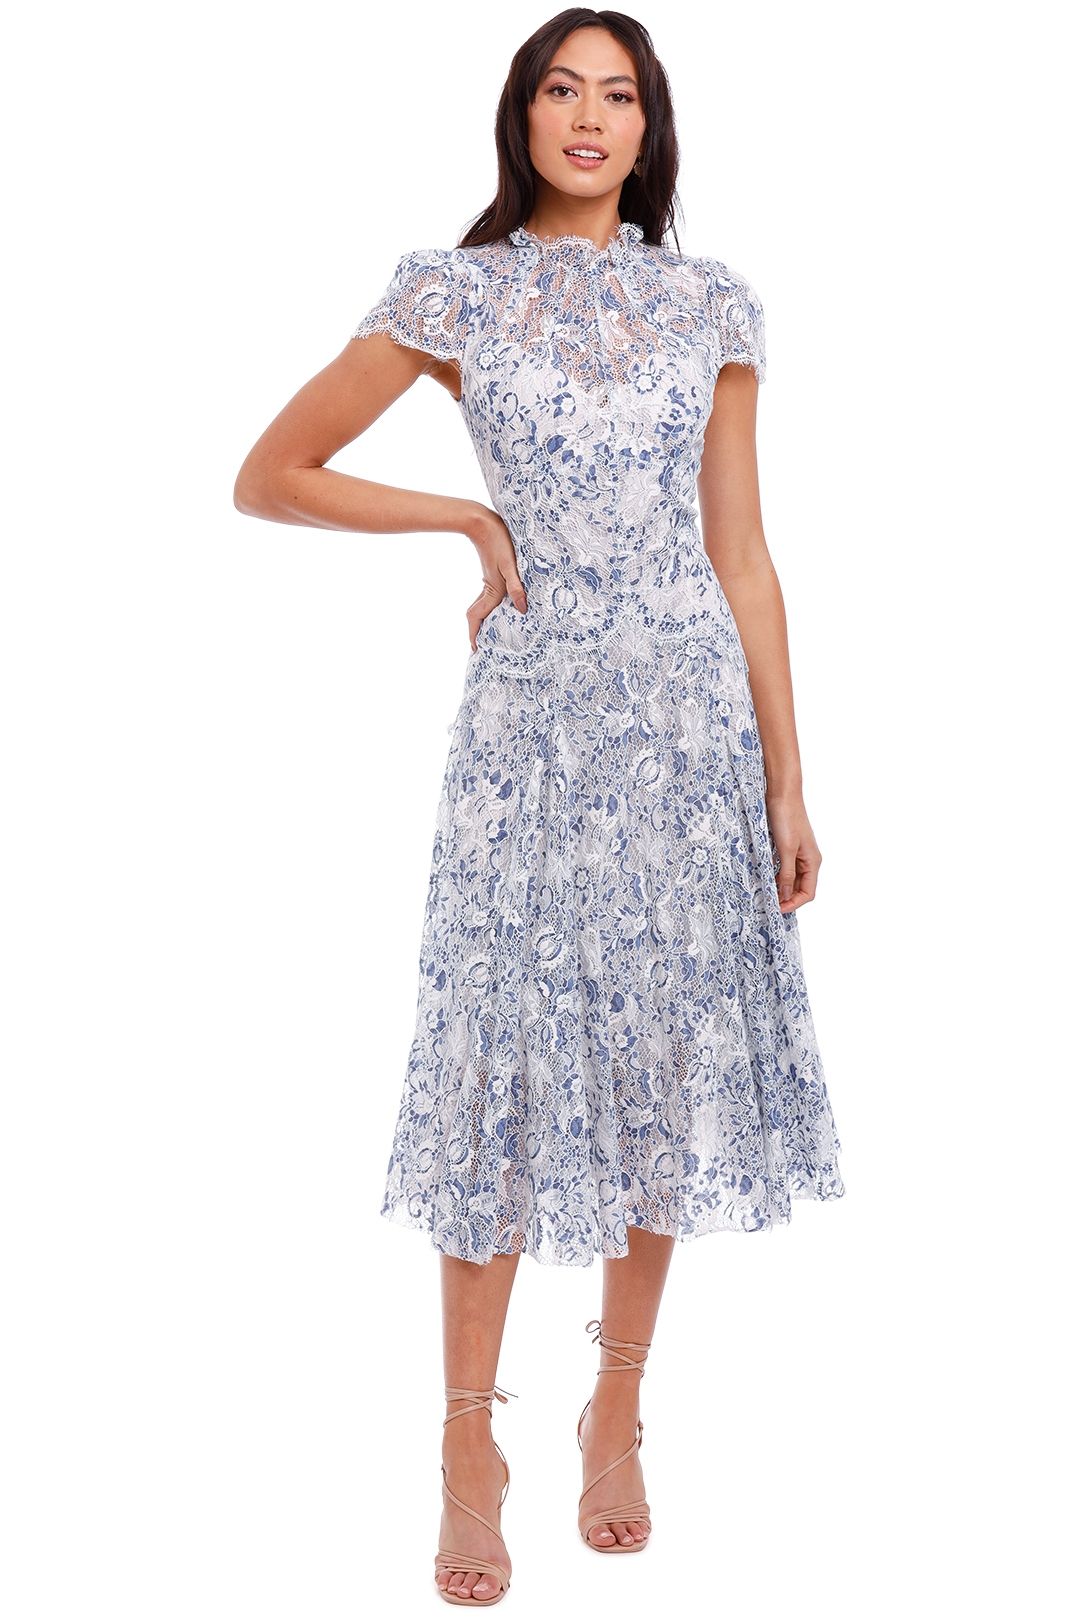 Moss and Spy Elodie Dress Blue